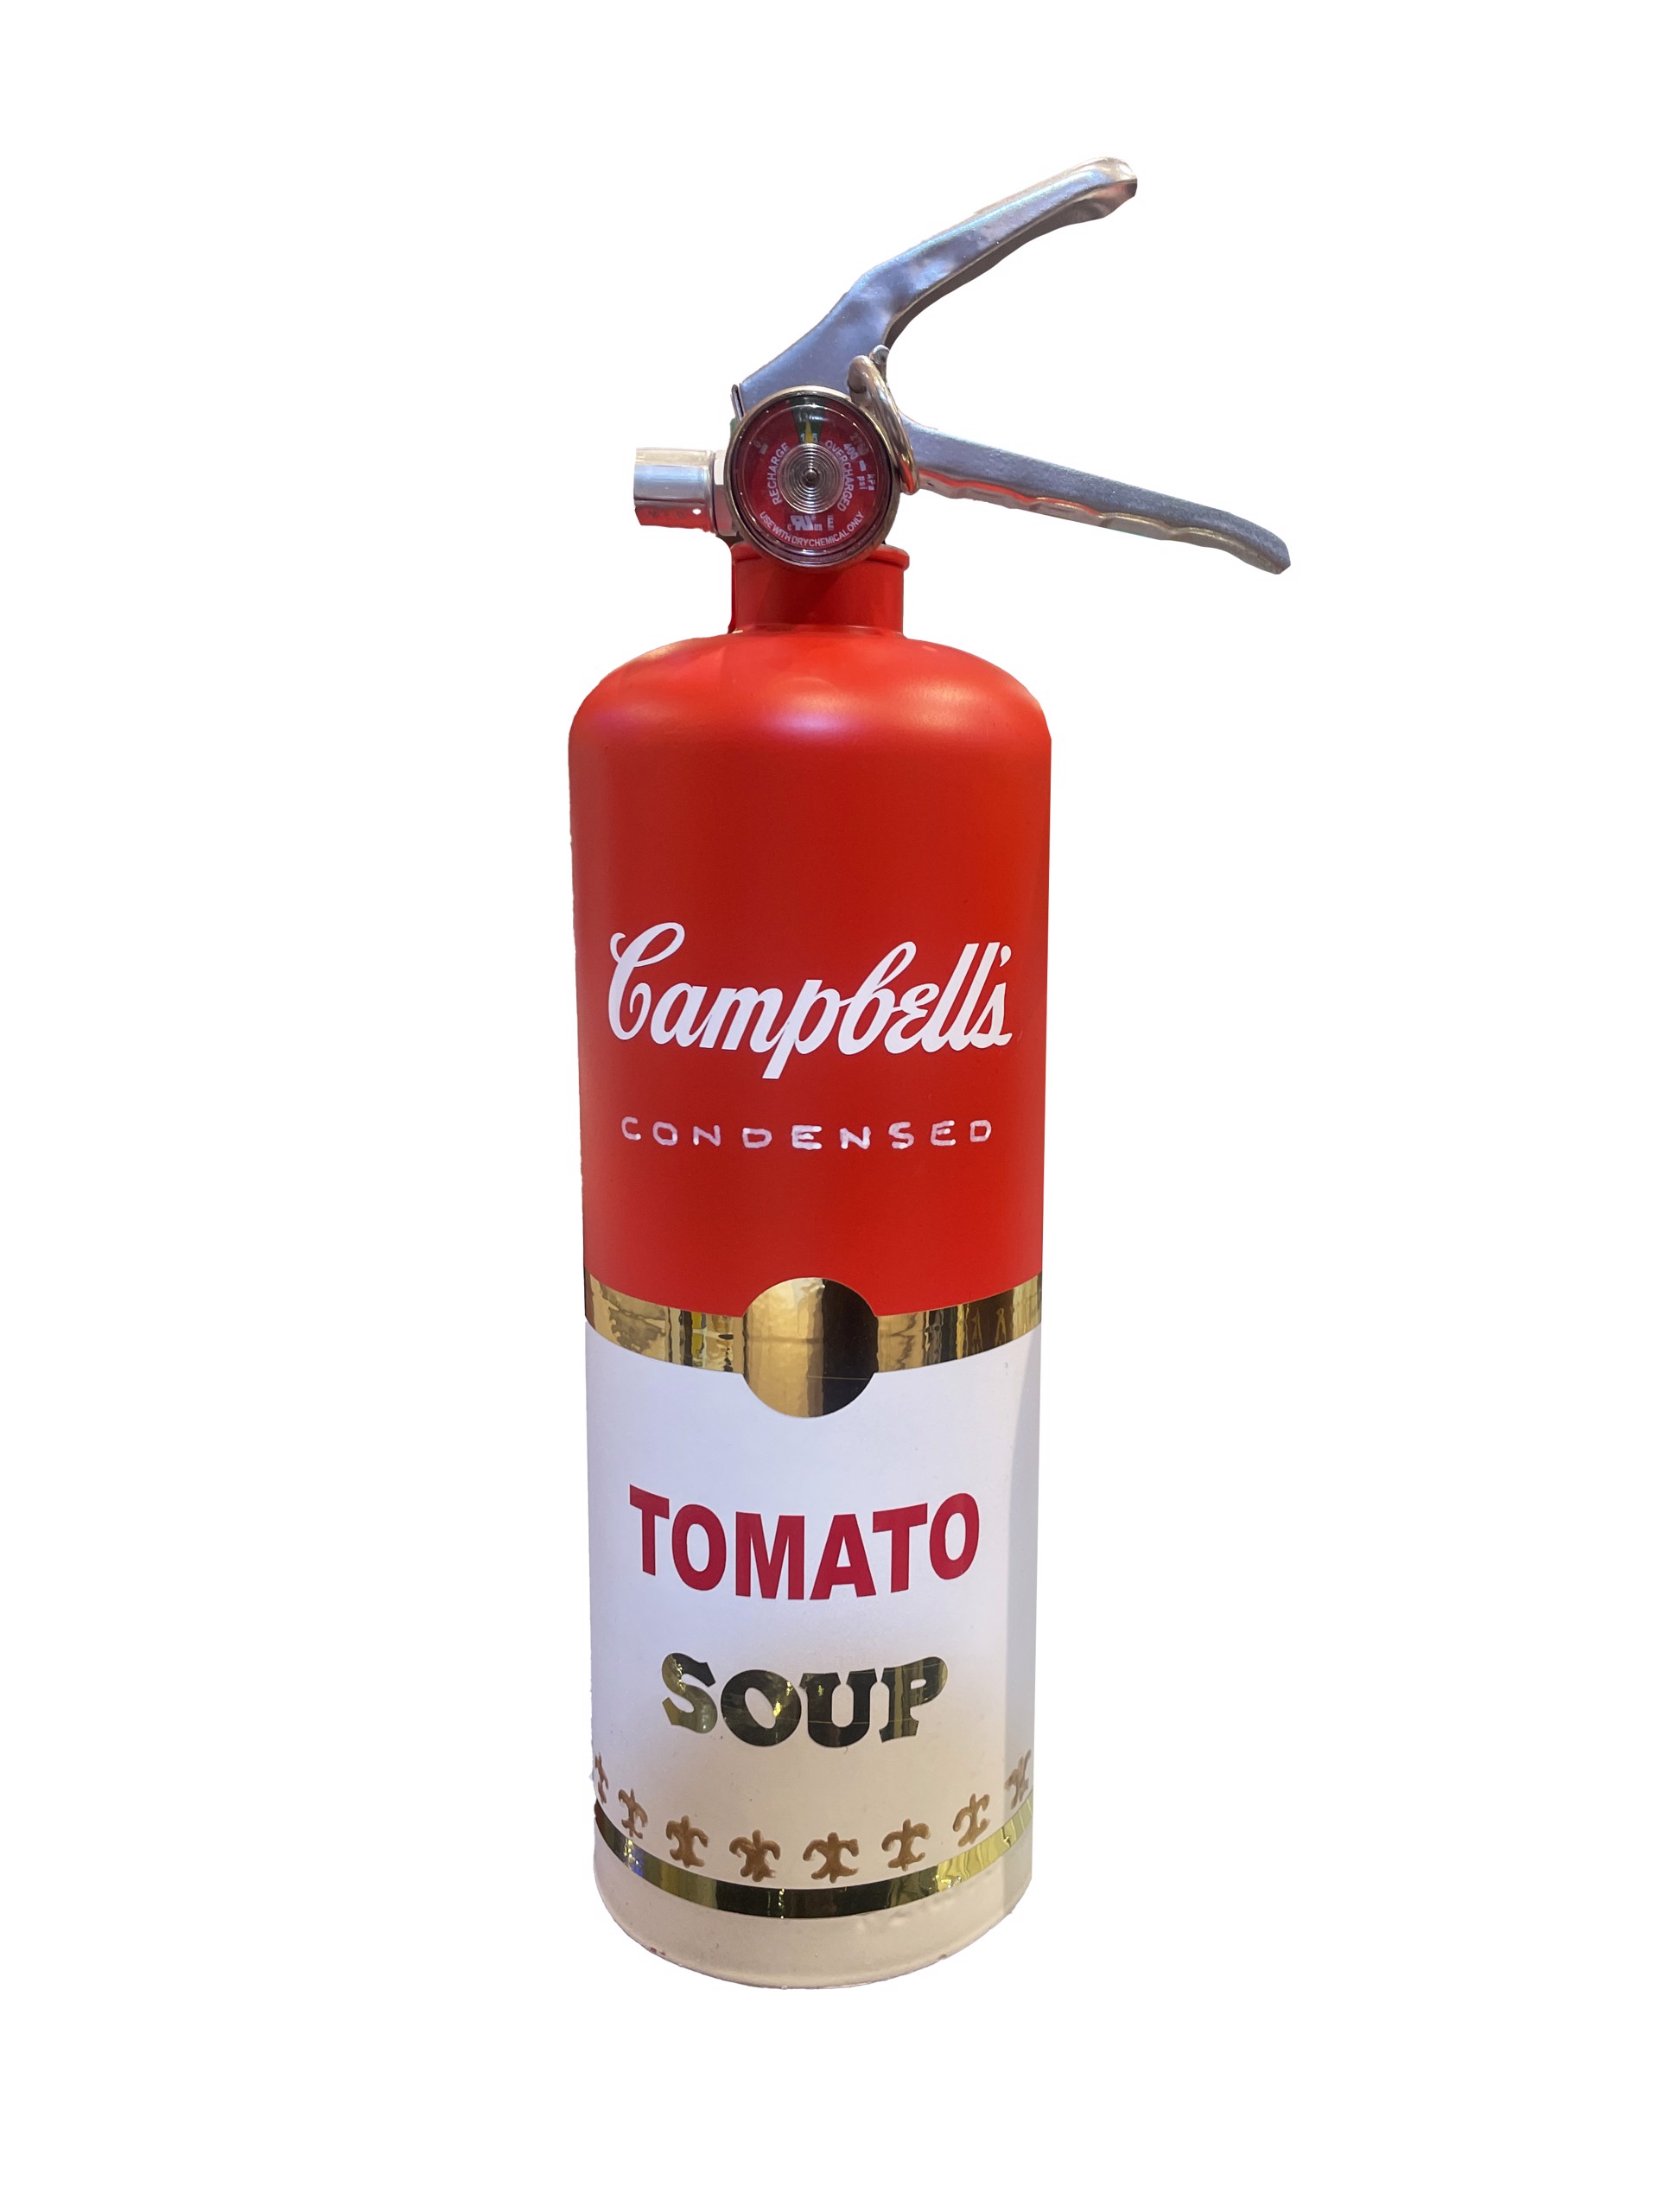 Campbell's Fire Extinguisher by David Mir